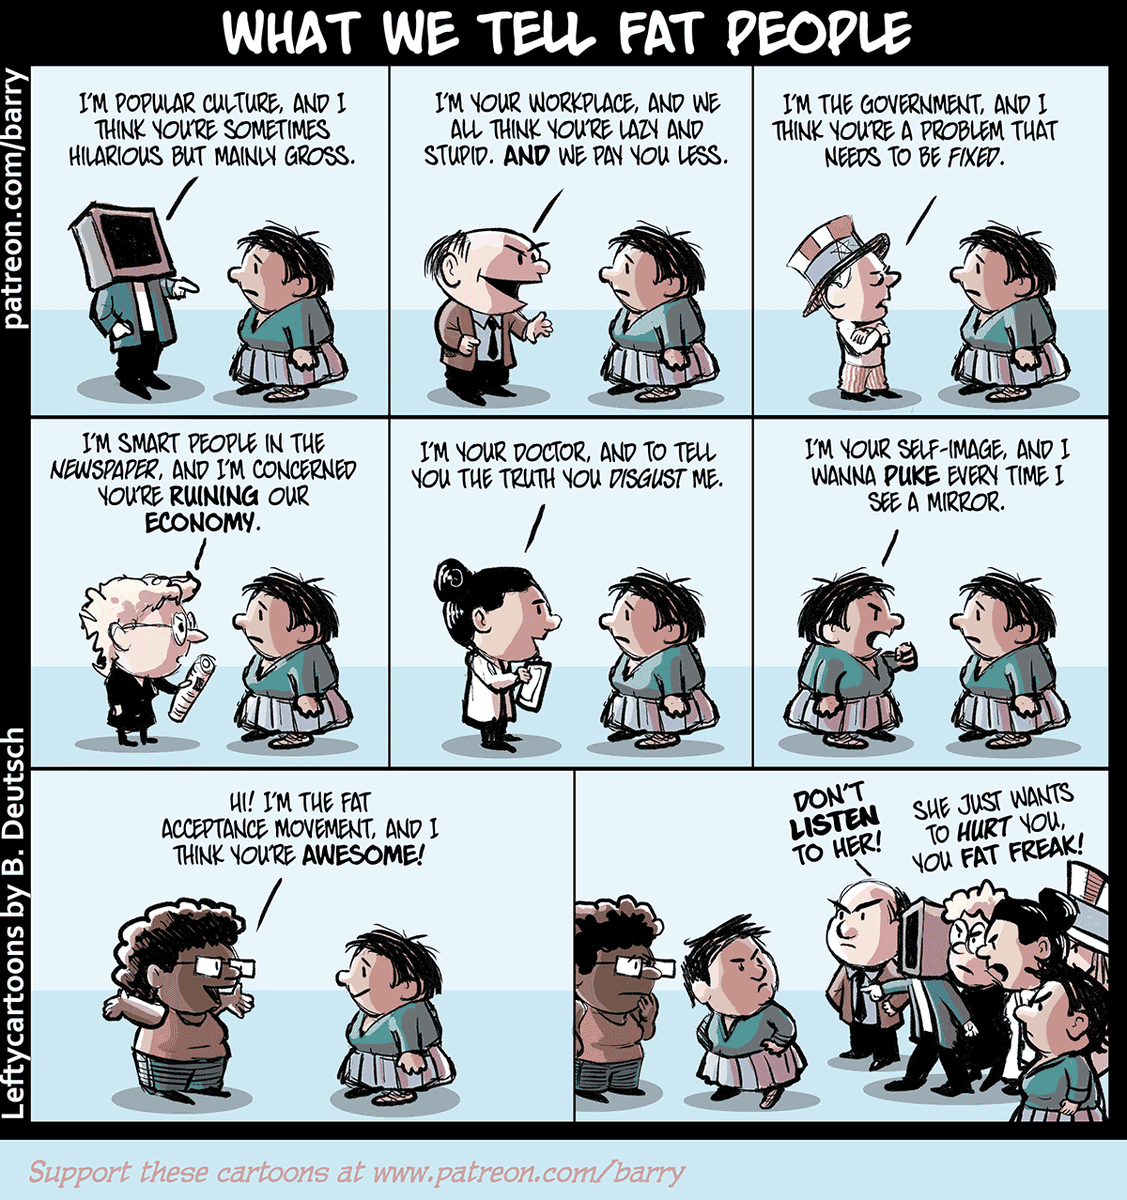 A thread of Fat Acceptance cartoons! What We Tell Fat PeopleTranscript:  https://www.patreon.com/posts/what-we-tell-fat-7884329Like the cartoons? Support them by retweeting, or by pledging a buck or two at  http://patreon.com/barry .  #FatAcceptance  #PoliCartoon